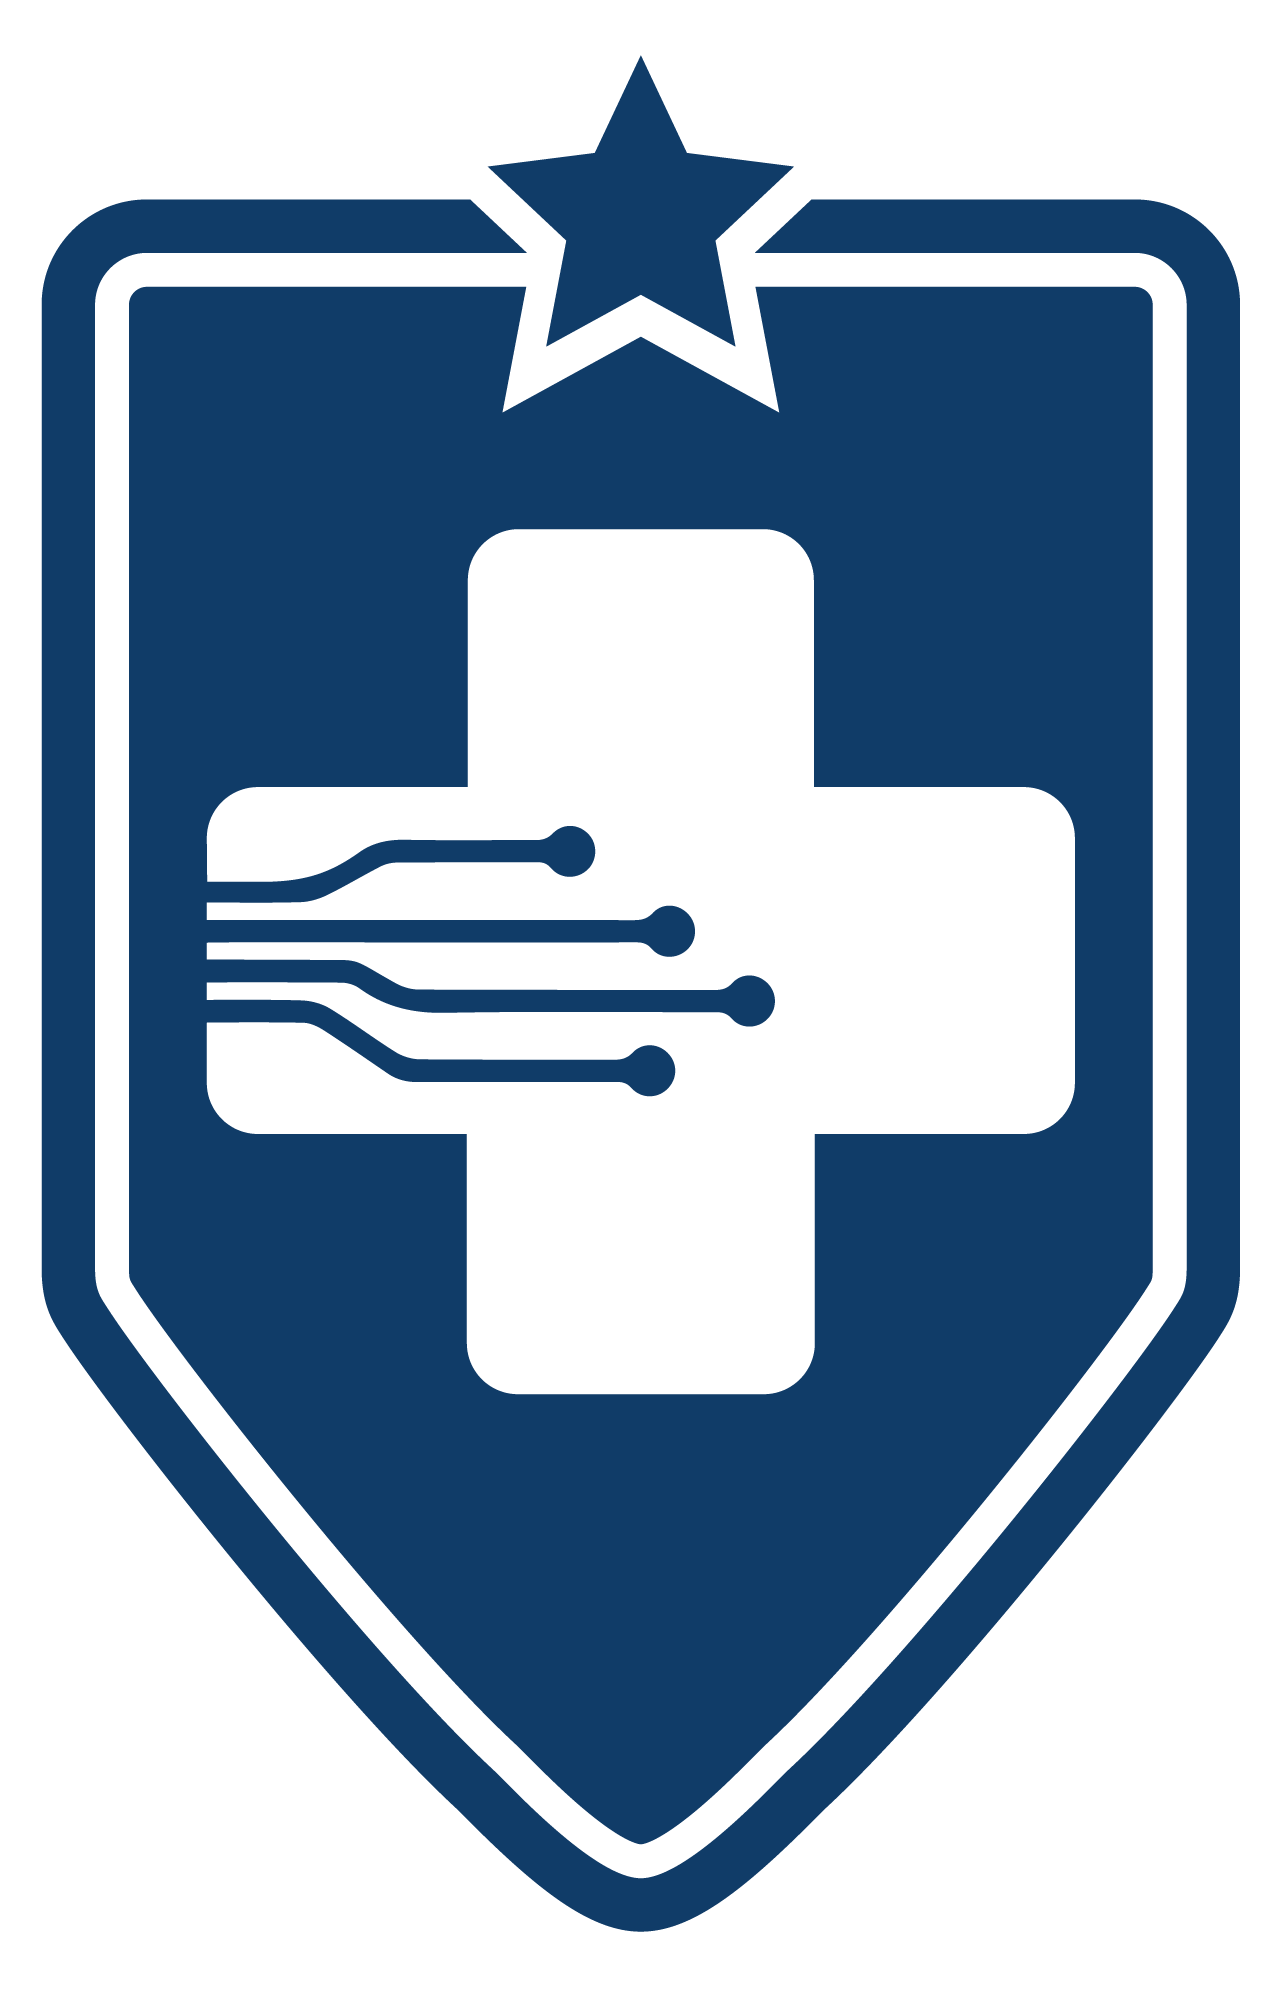 digital service at center for medicare and medicaid services logo